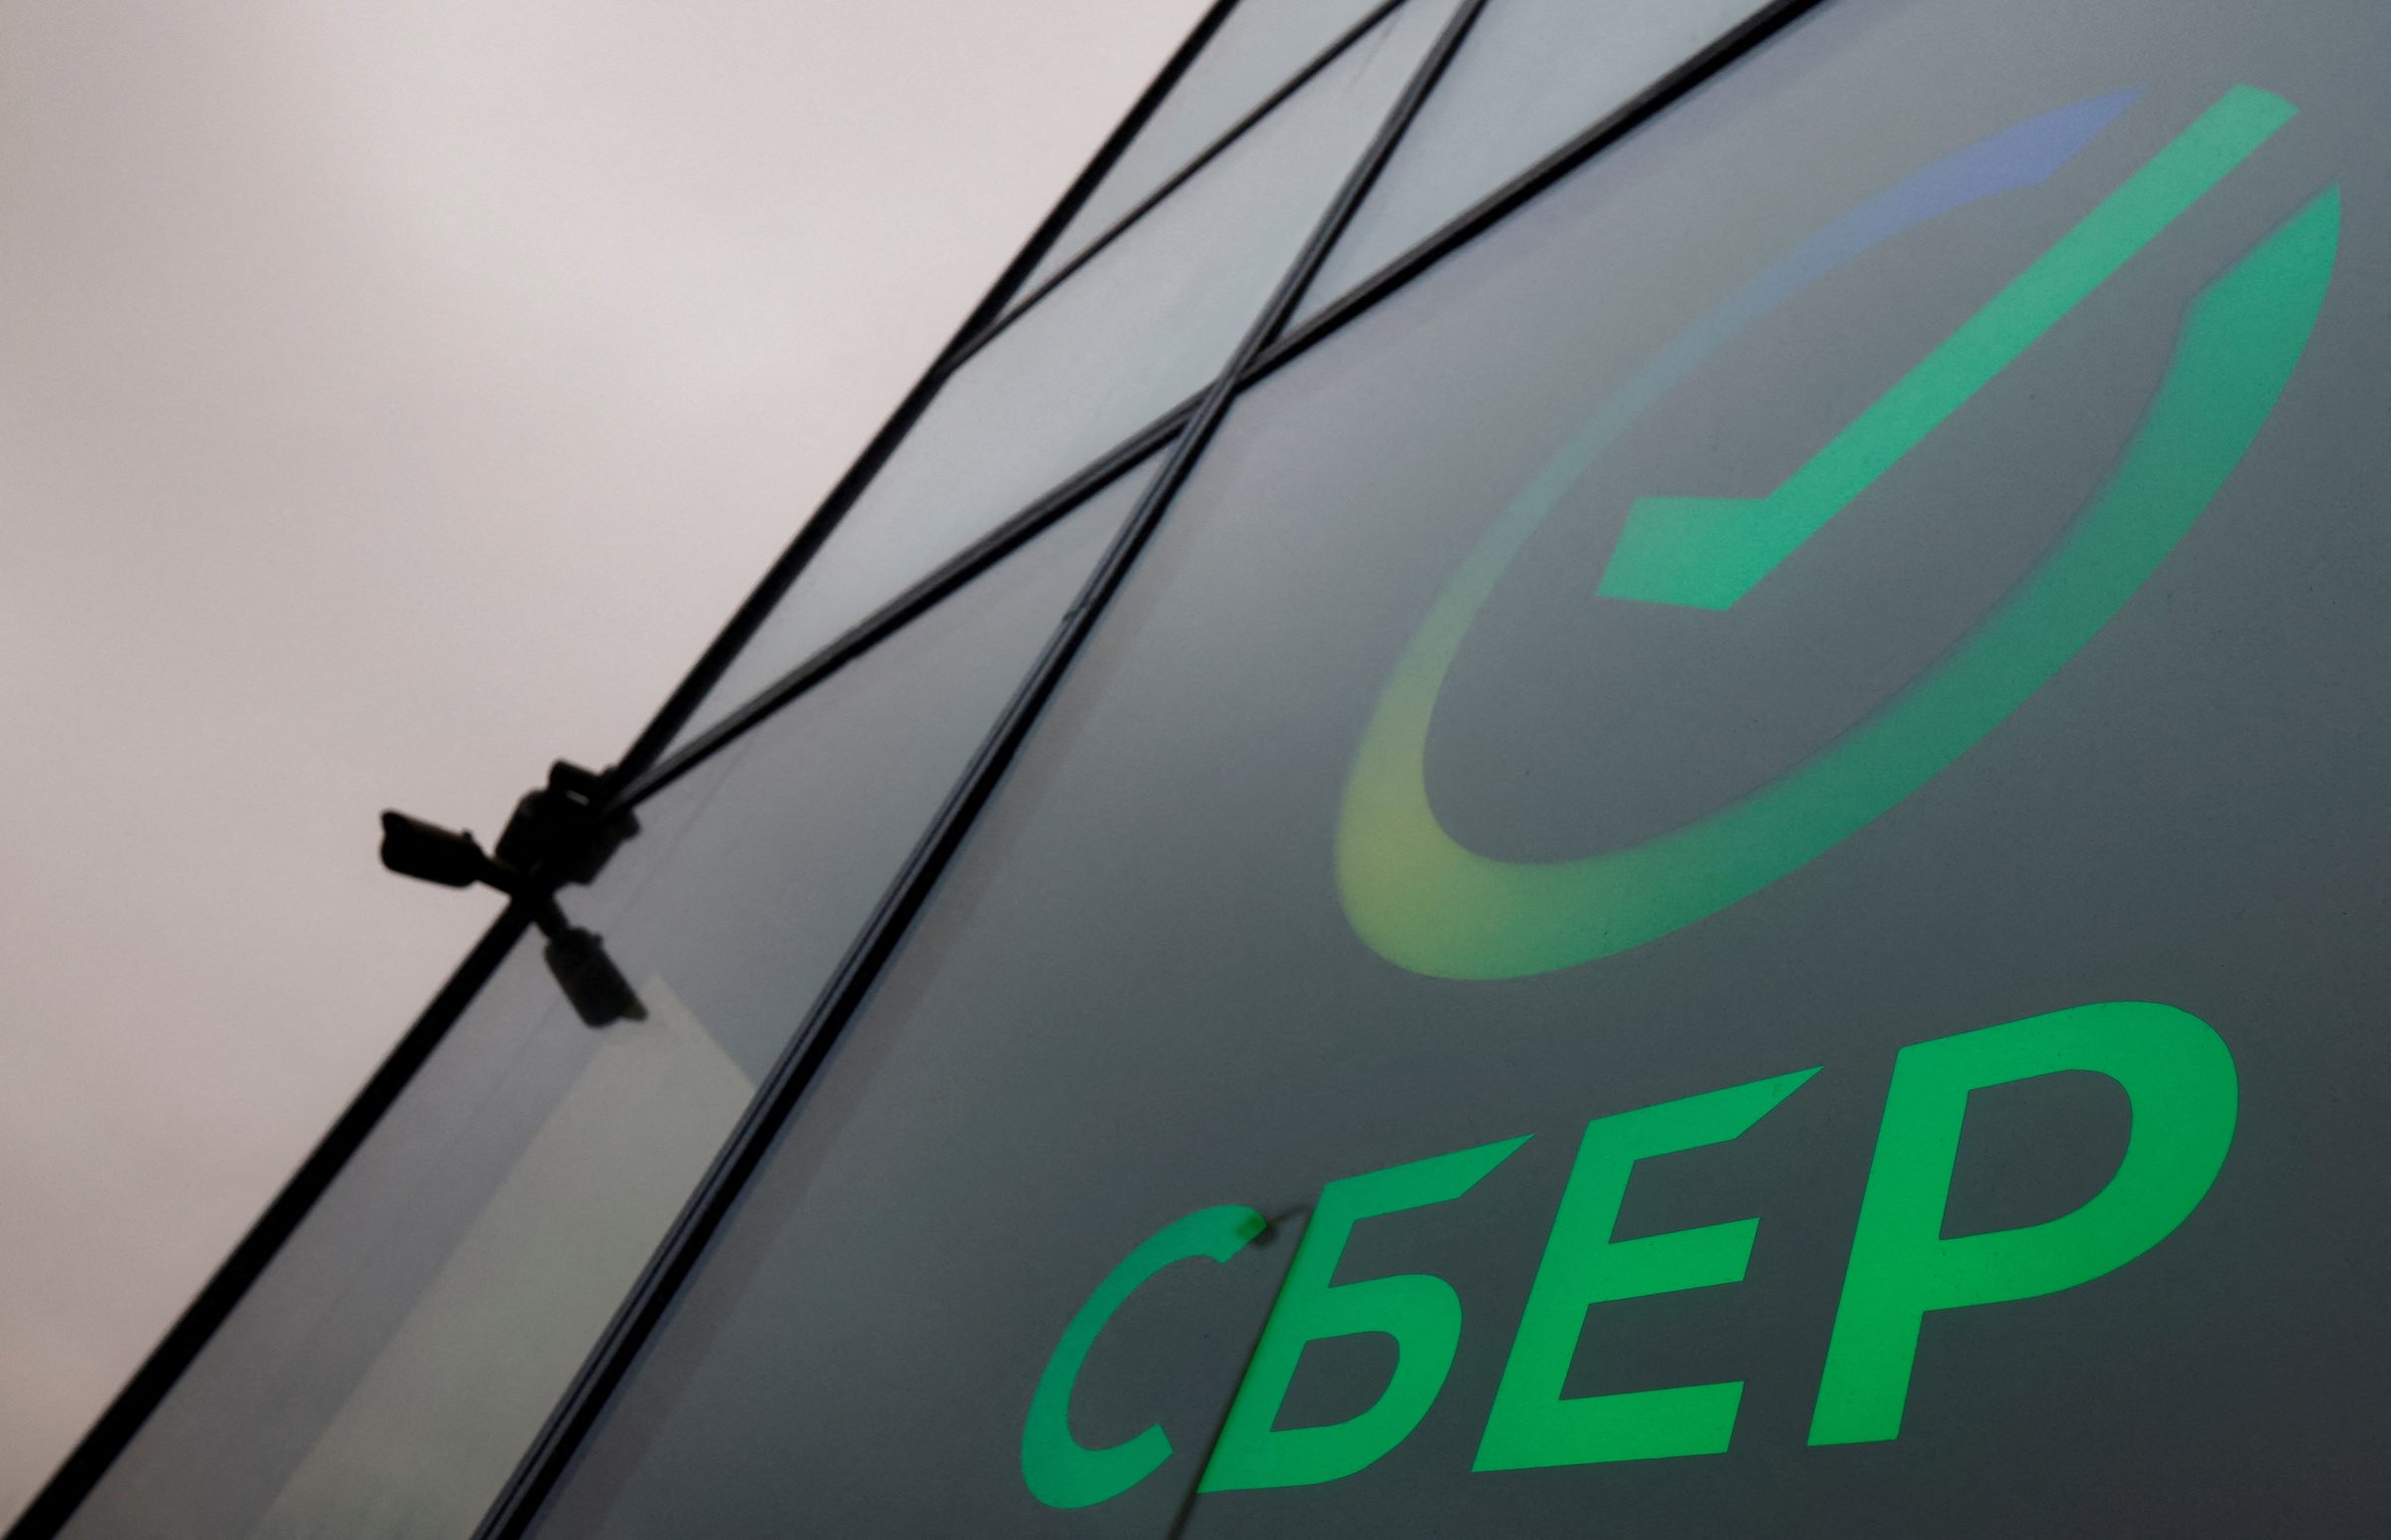 Russia’s Sberbank in Europe faces closure after savers demand money